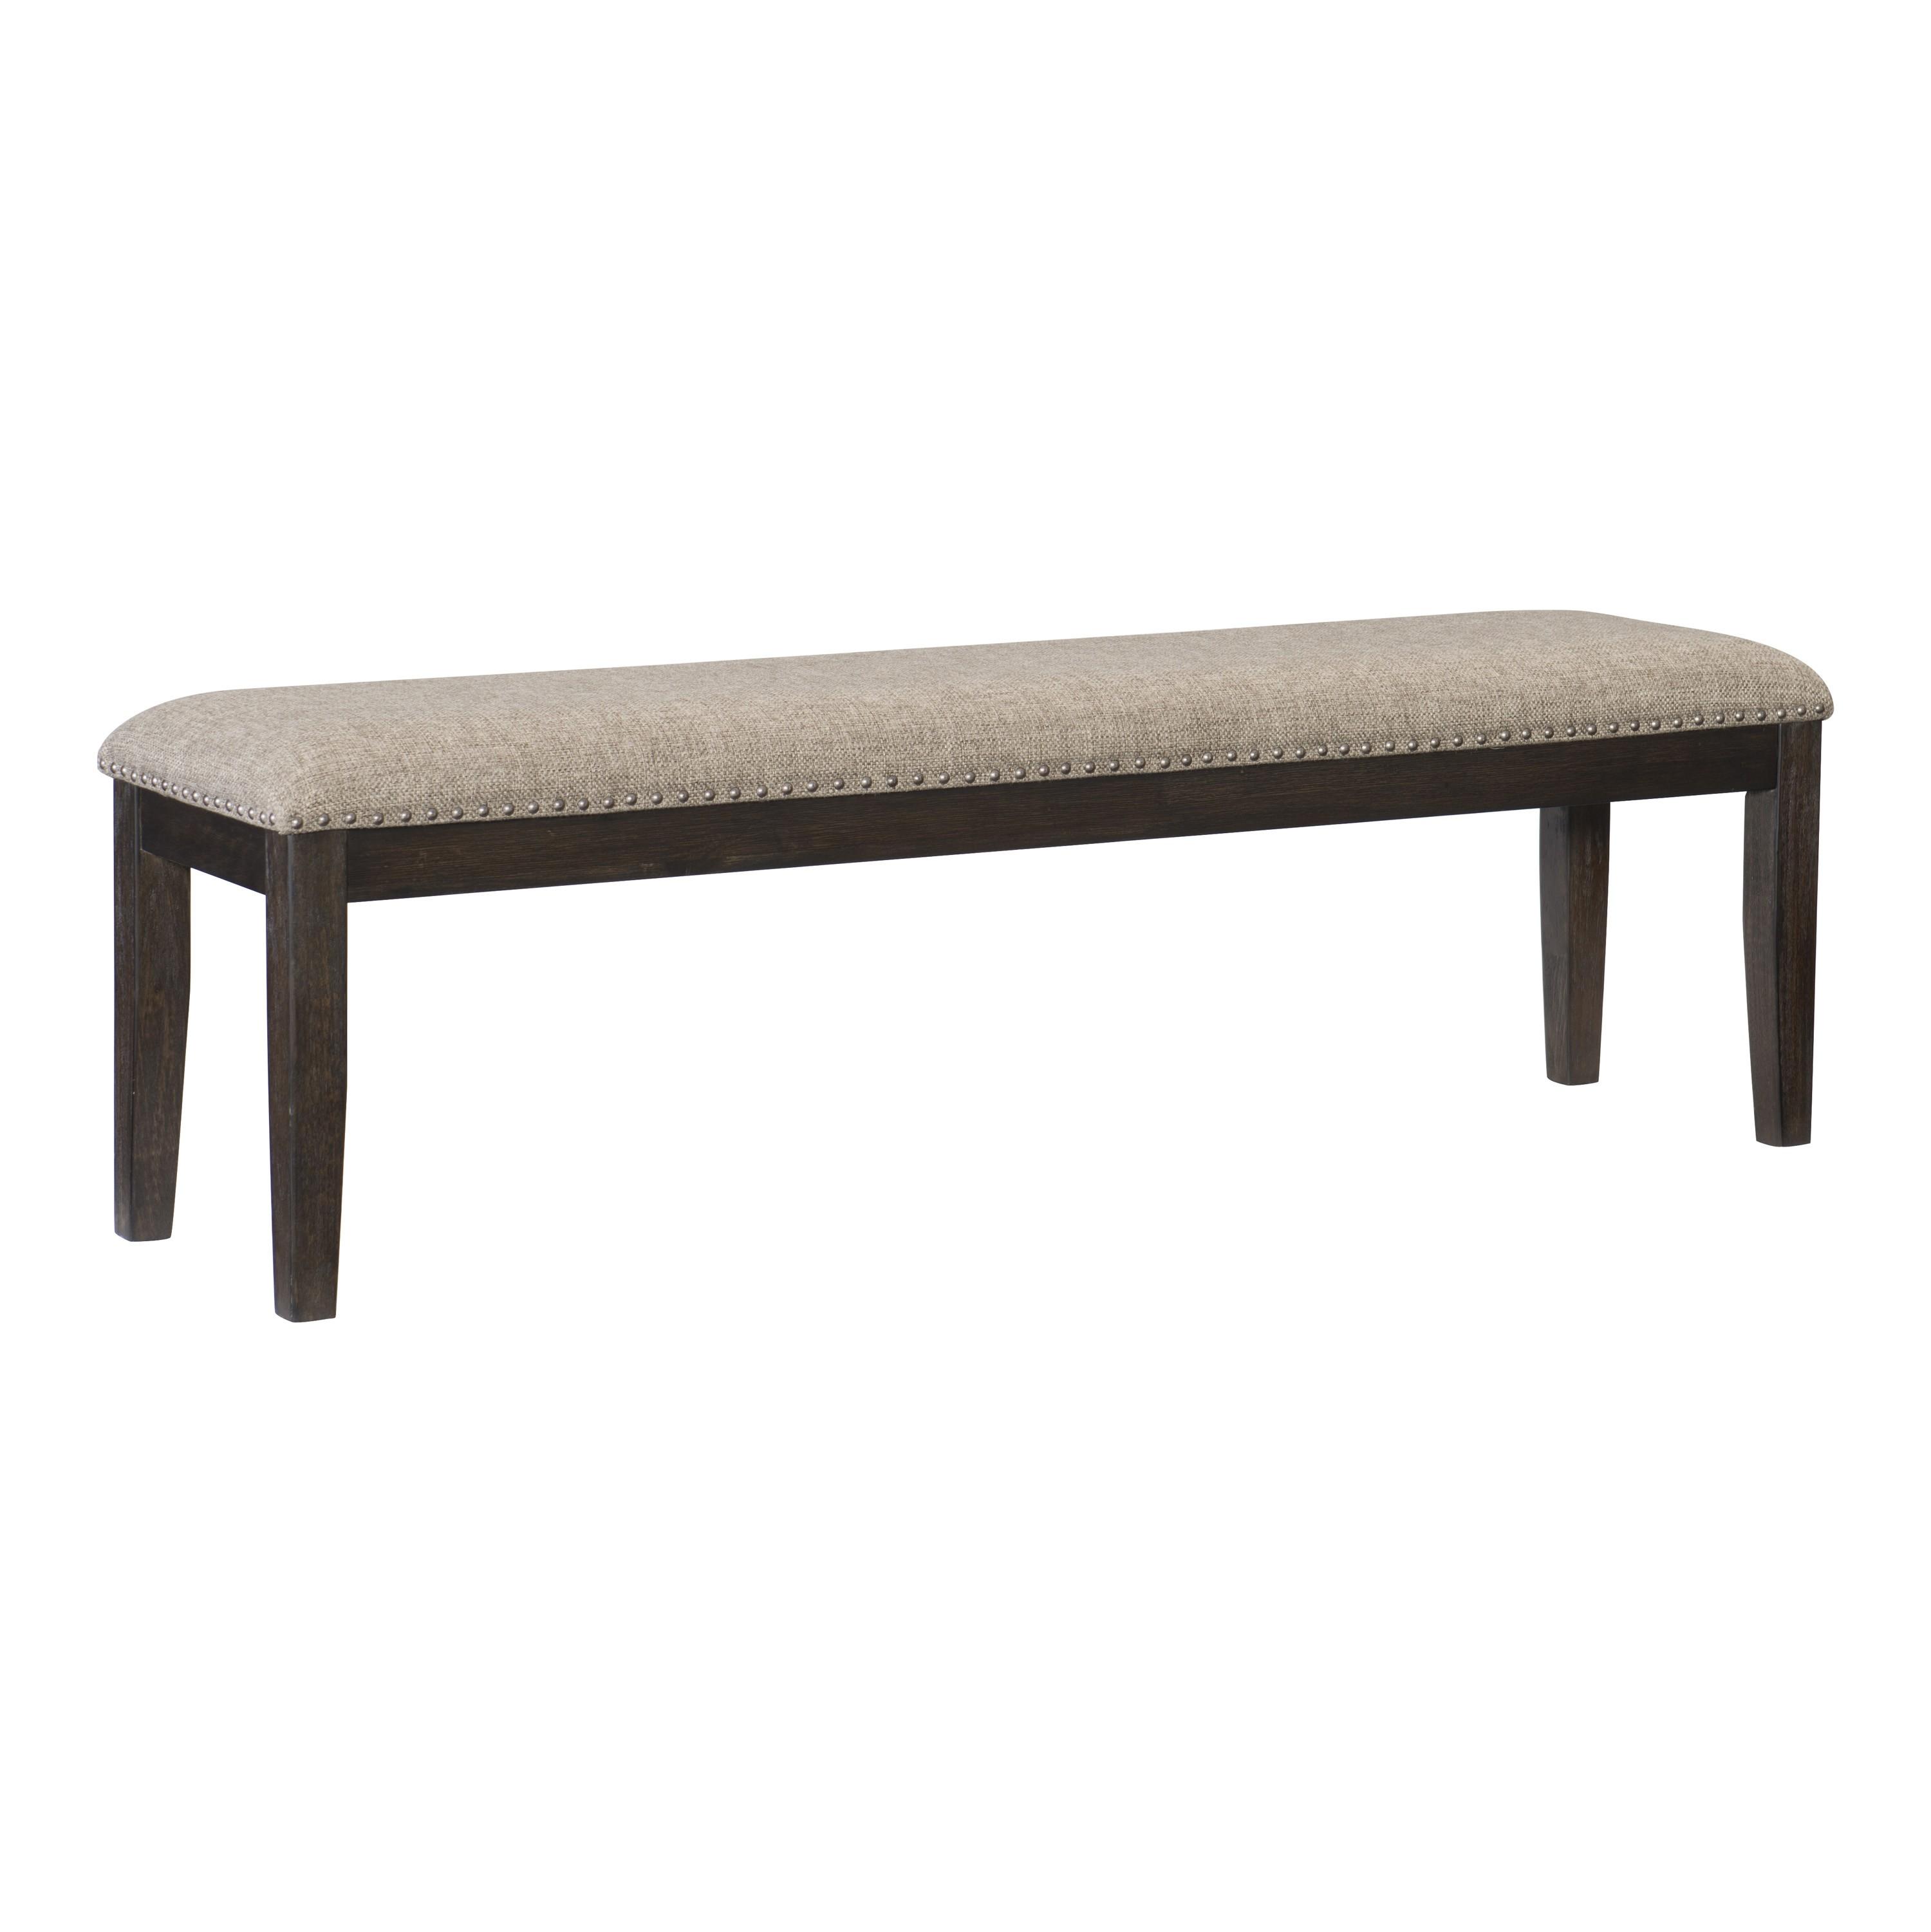 Traditional Bench 5741-13 Southlake 5741-13 in Rustic Brown Polyester